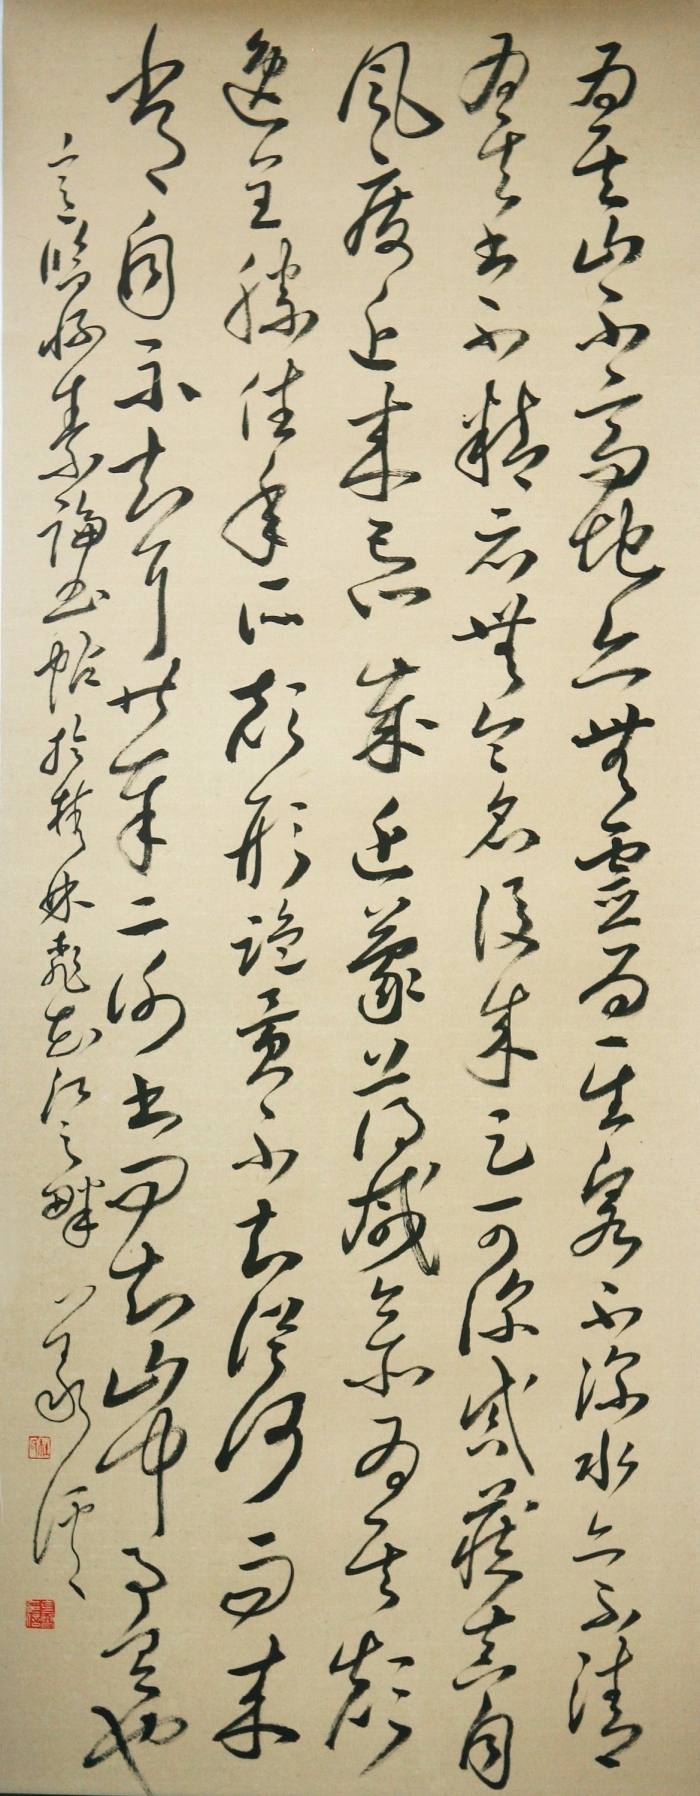 Hefeng Hall Gallery's Contemporary Chinese Painting - Calligraphy 4